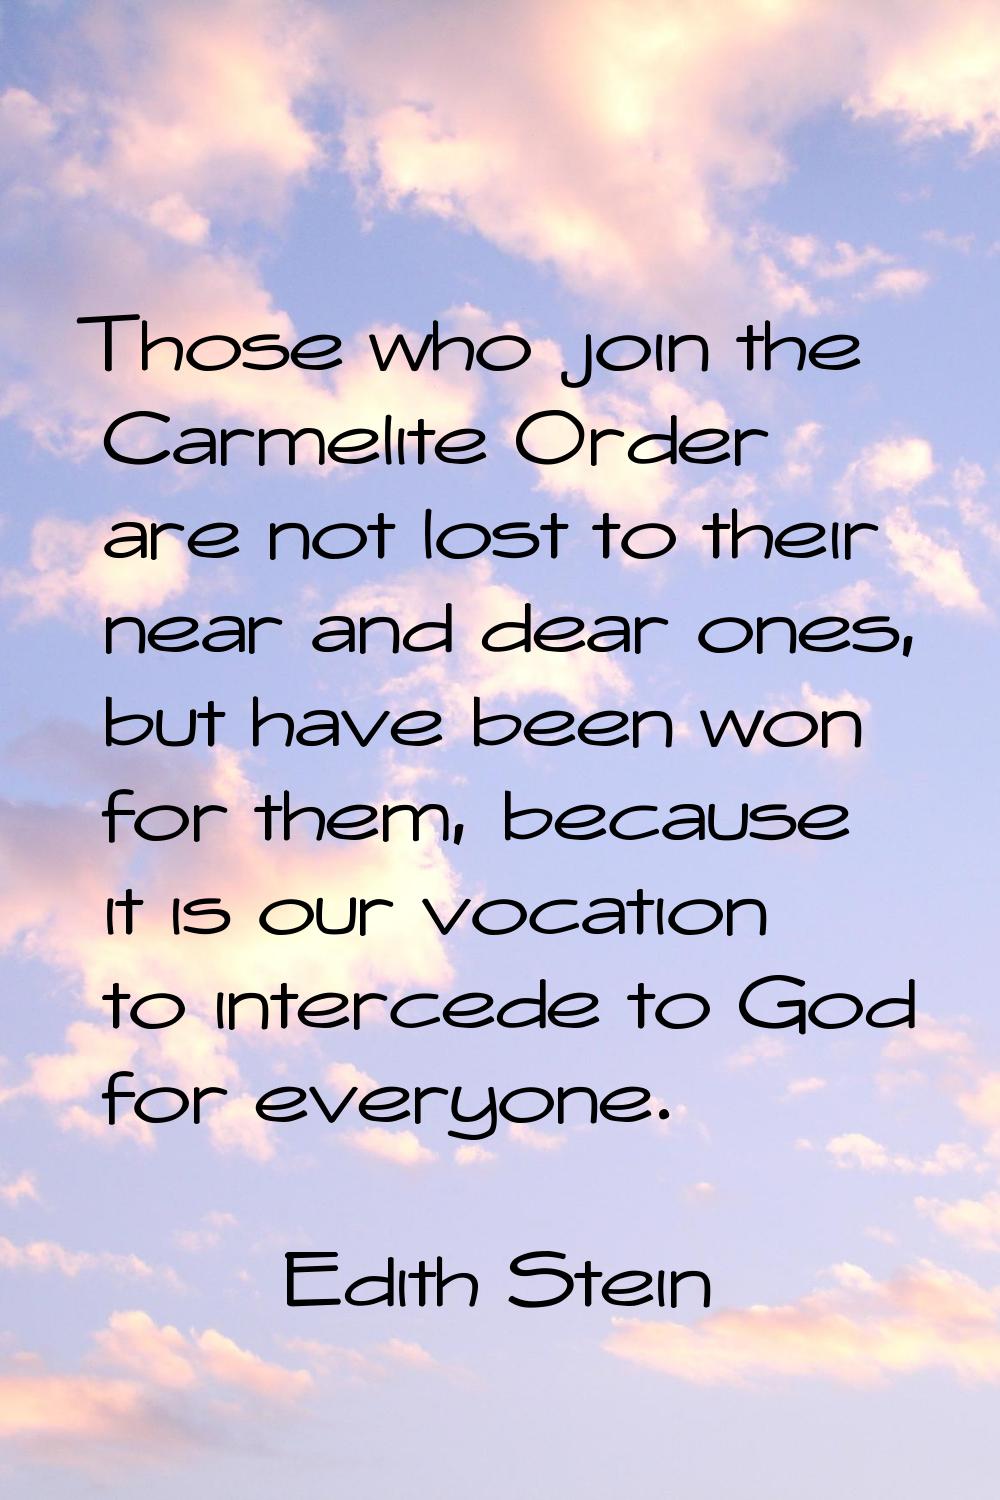 Those who join the Carmelite Order are not lost to their near and dear ones, but have been won for 